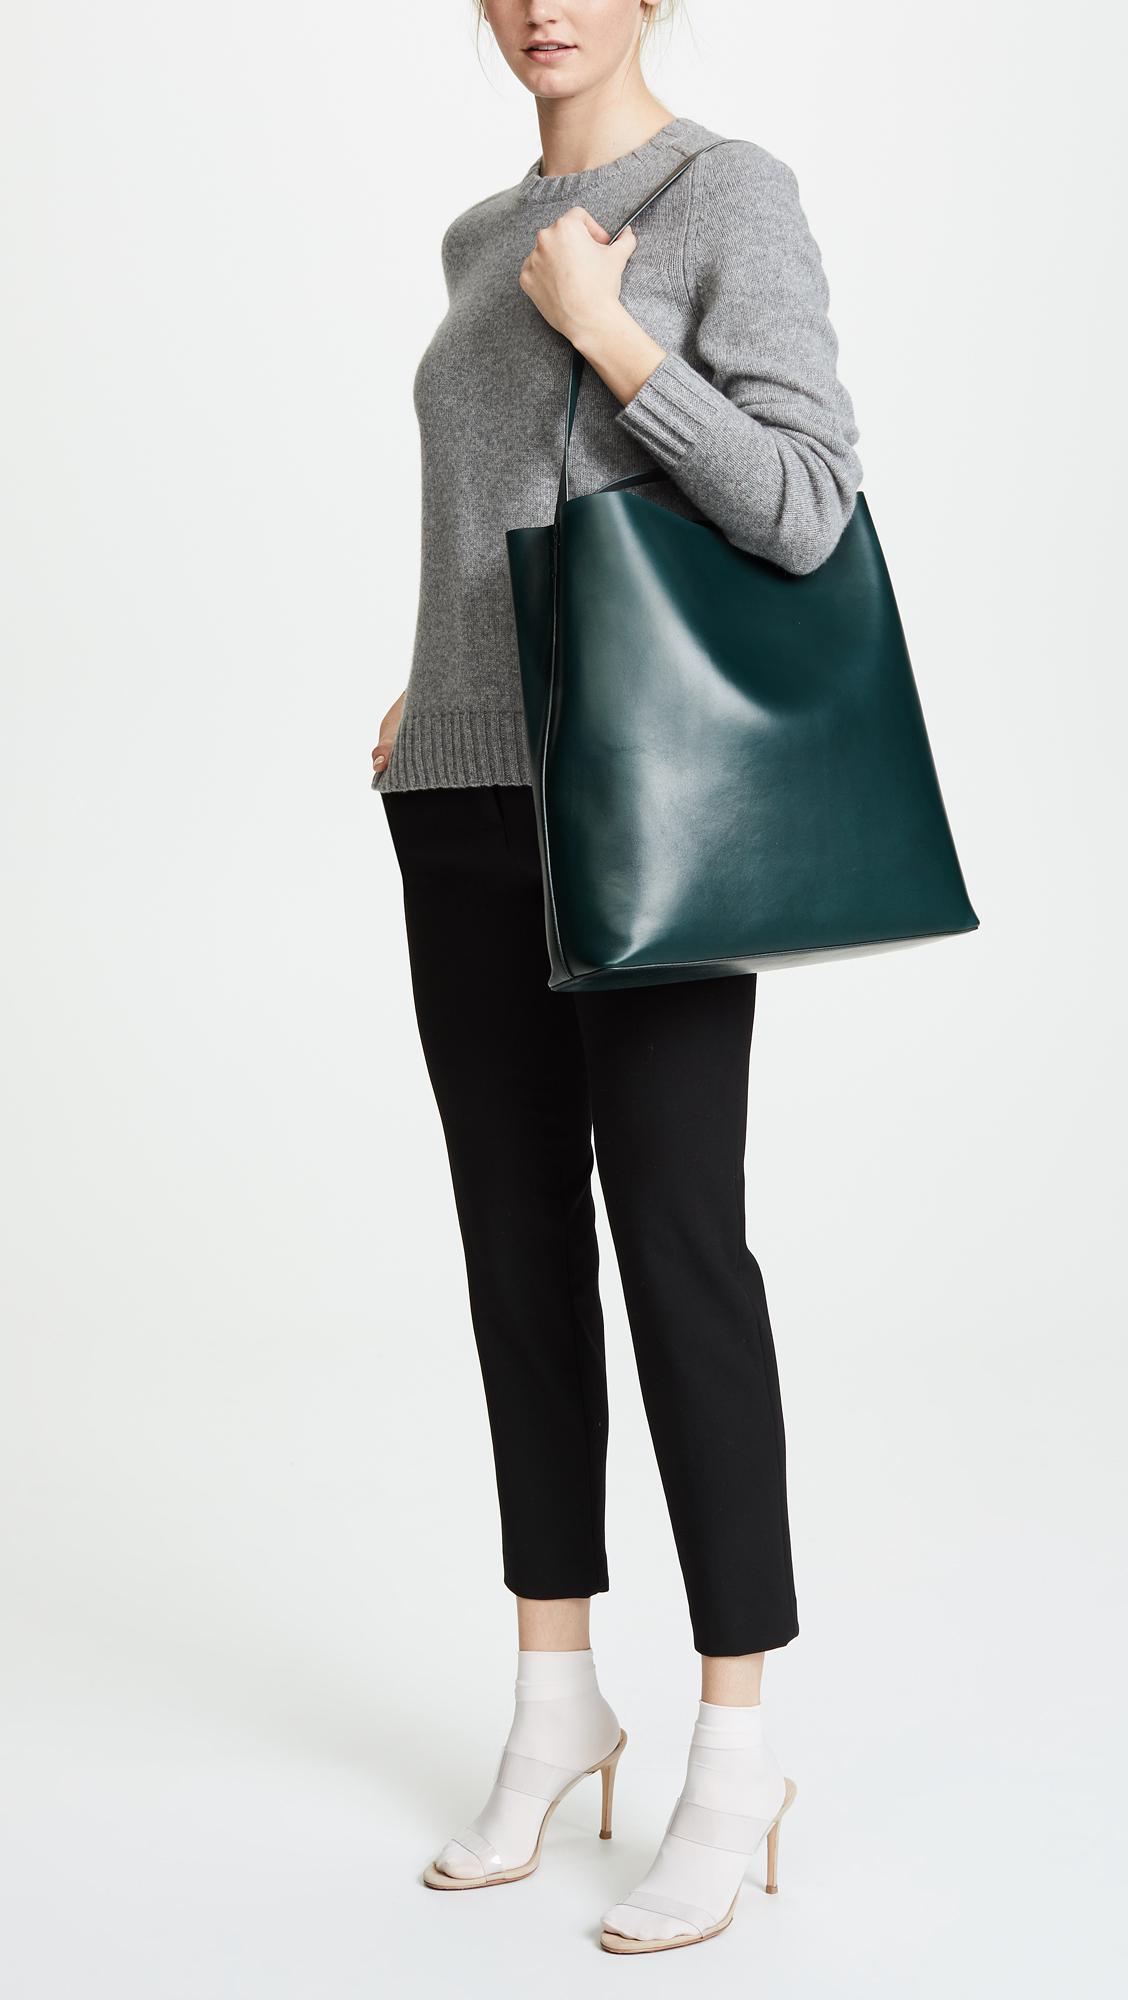 Aesther Ekme Leather Sac Tote Bag in Green - Lyst